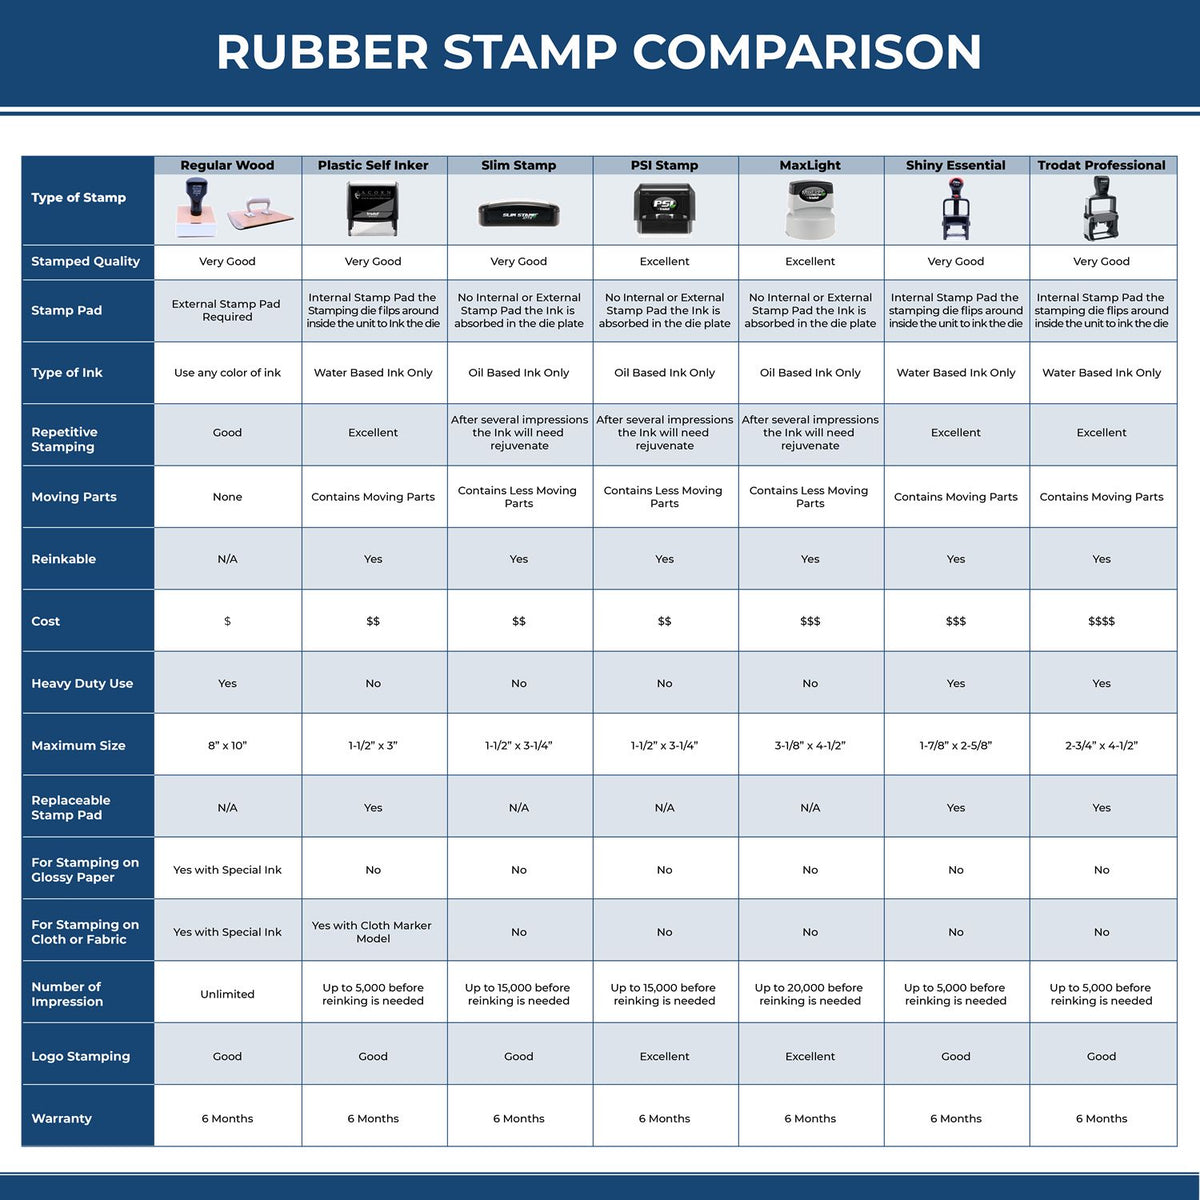 Large Self-Inking Narrow Benefits Assigned Stamp 4860S Rubber Stamp Comparison